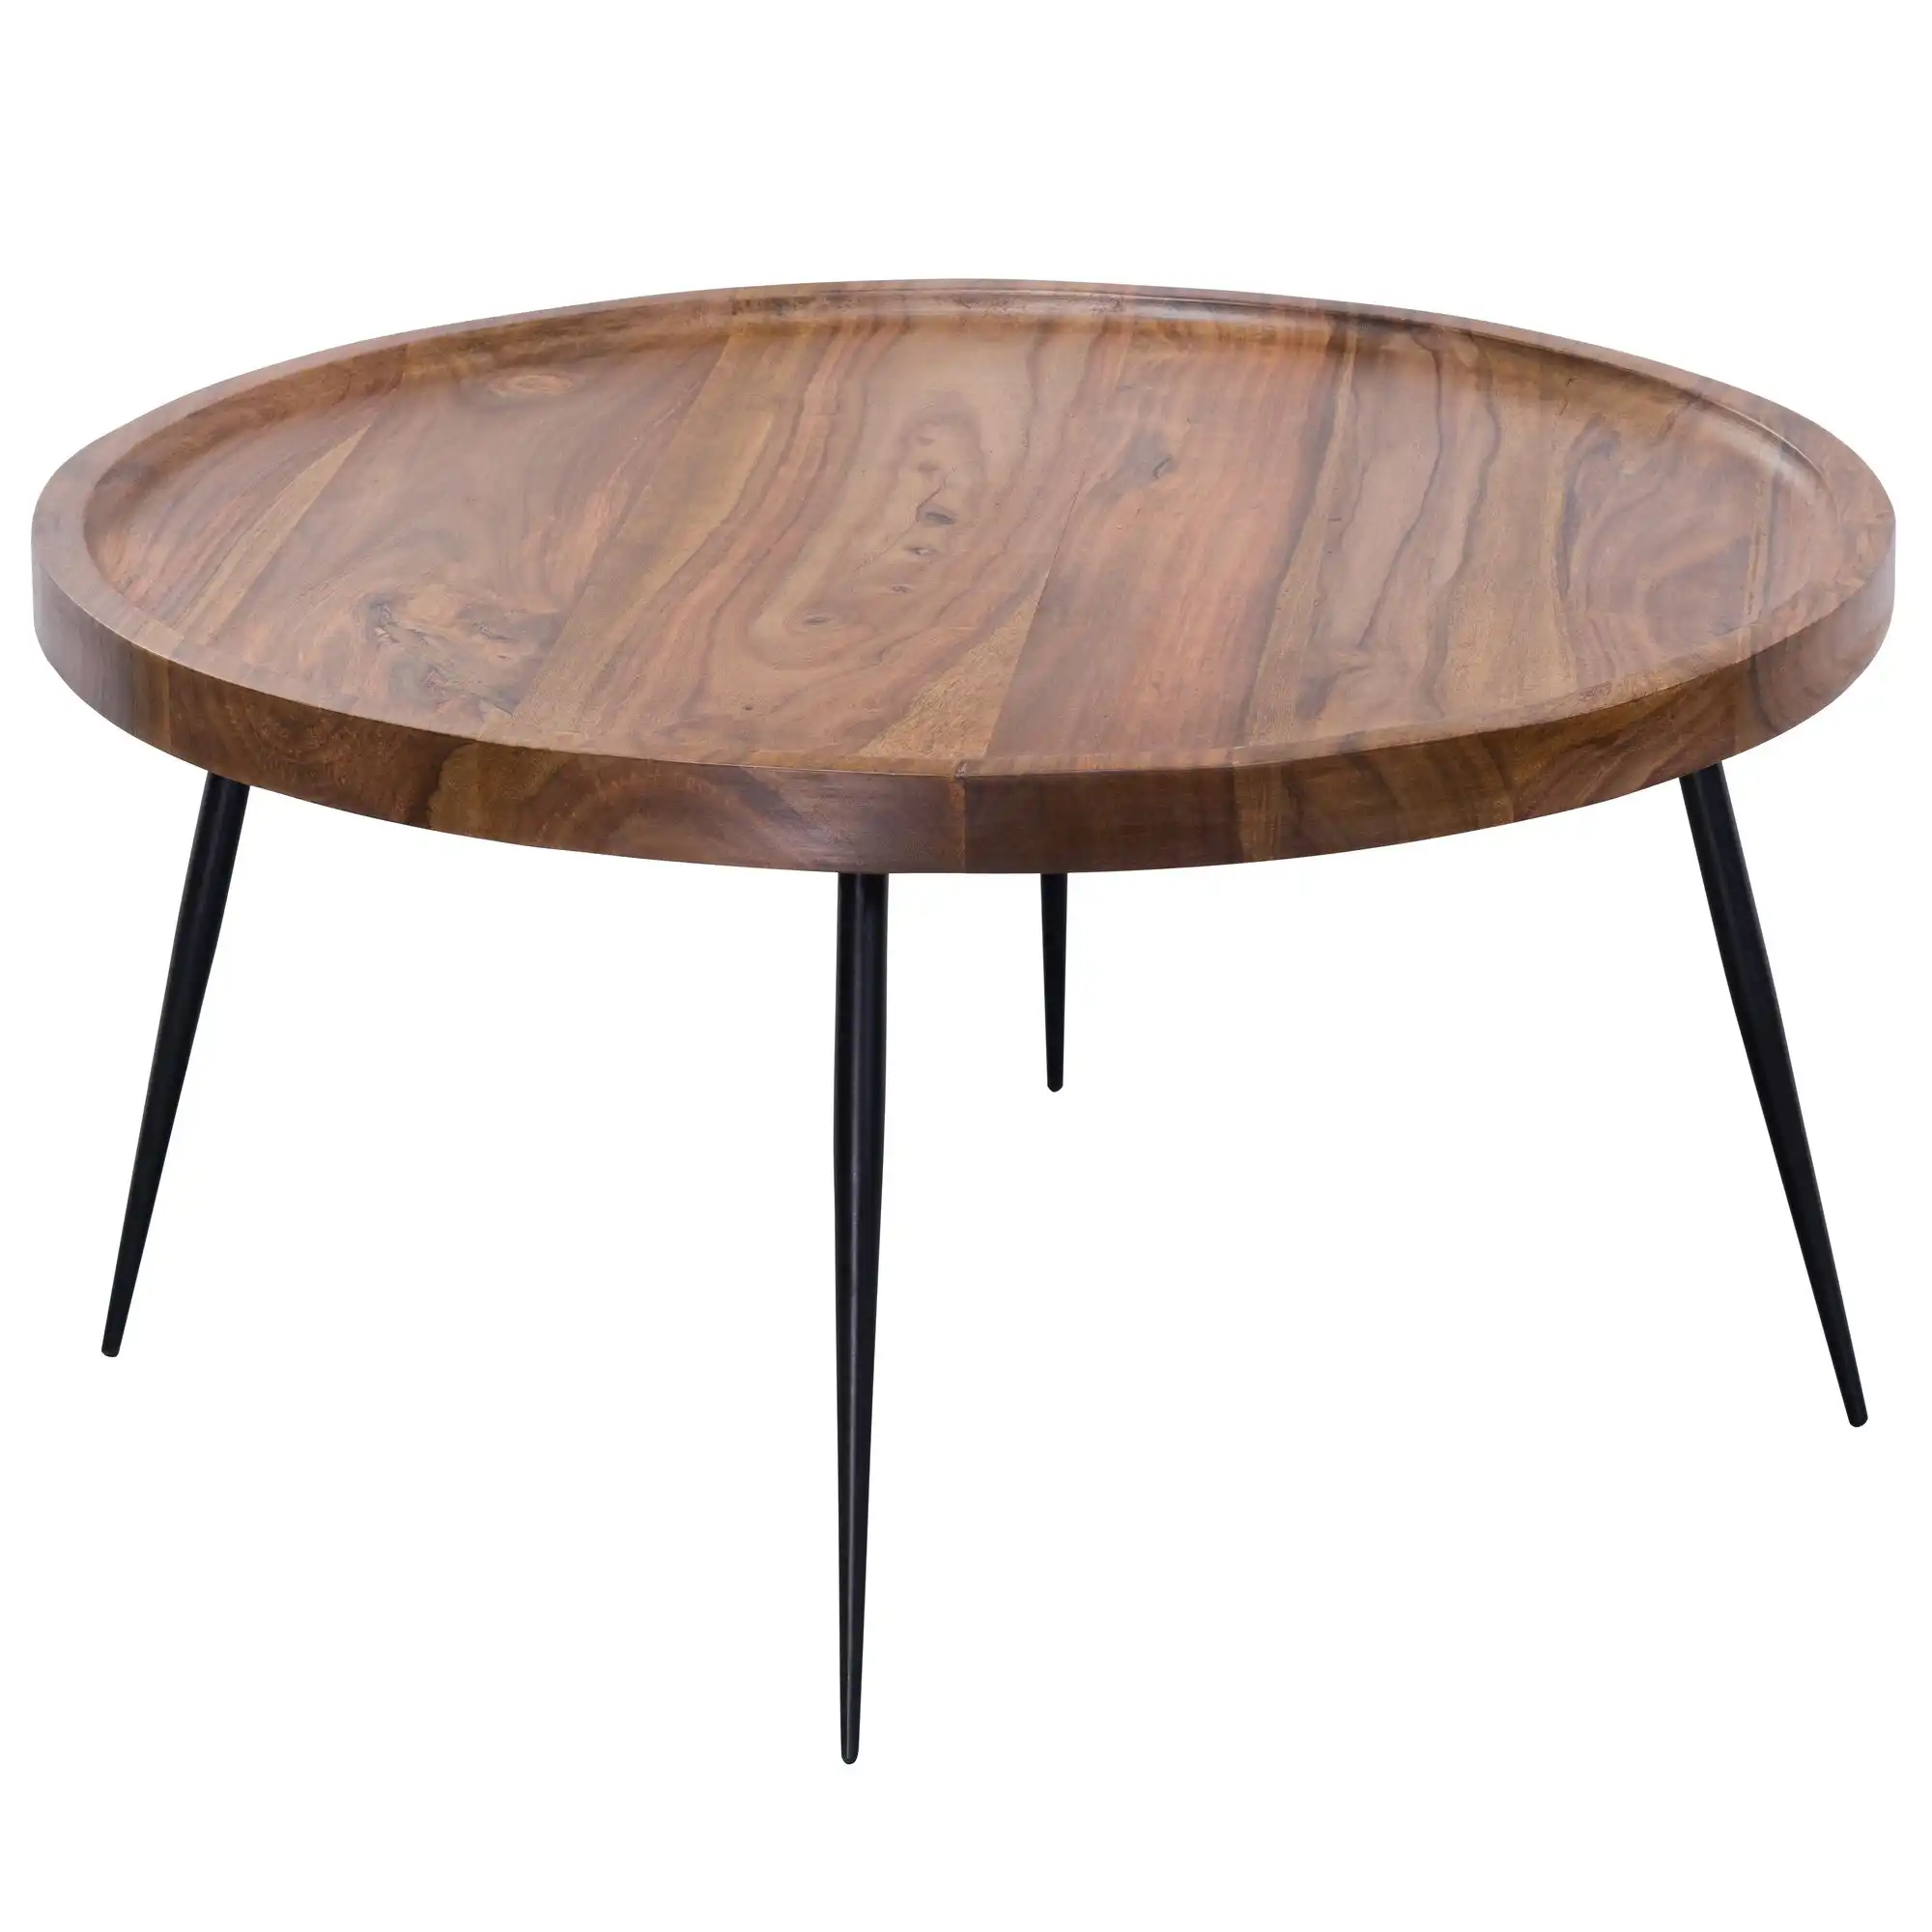 Sheesham Wood Oliver Round Tray Coffee Table with Iron Cone Legs (KD) - popular handicrafts